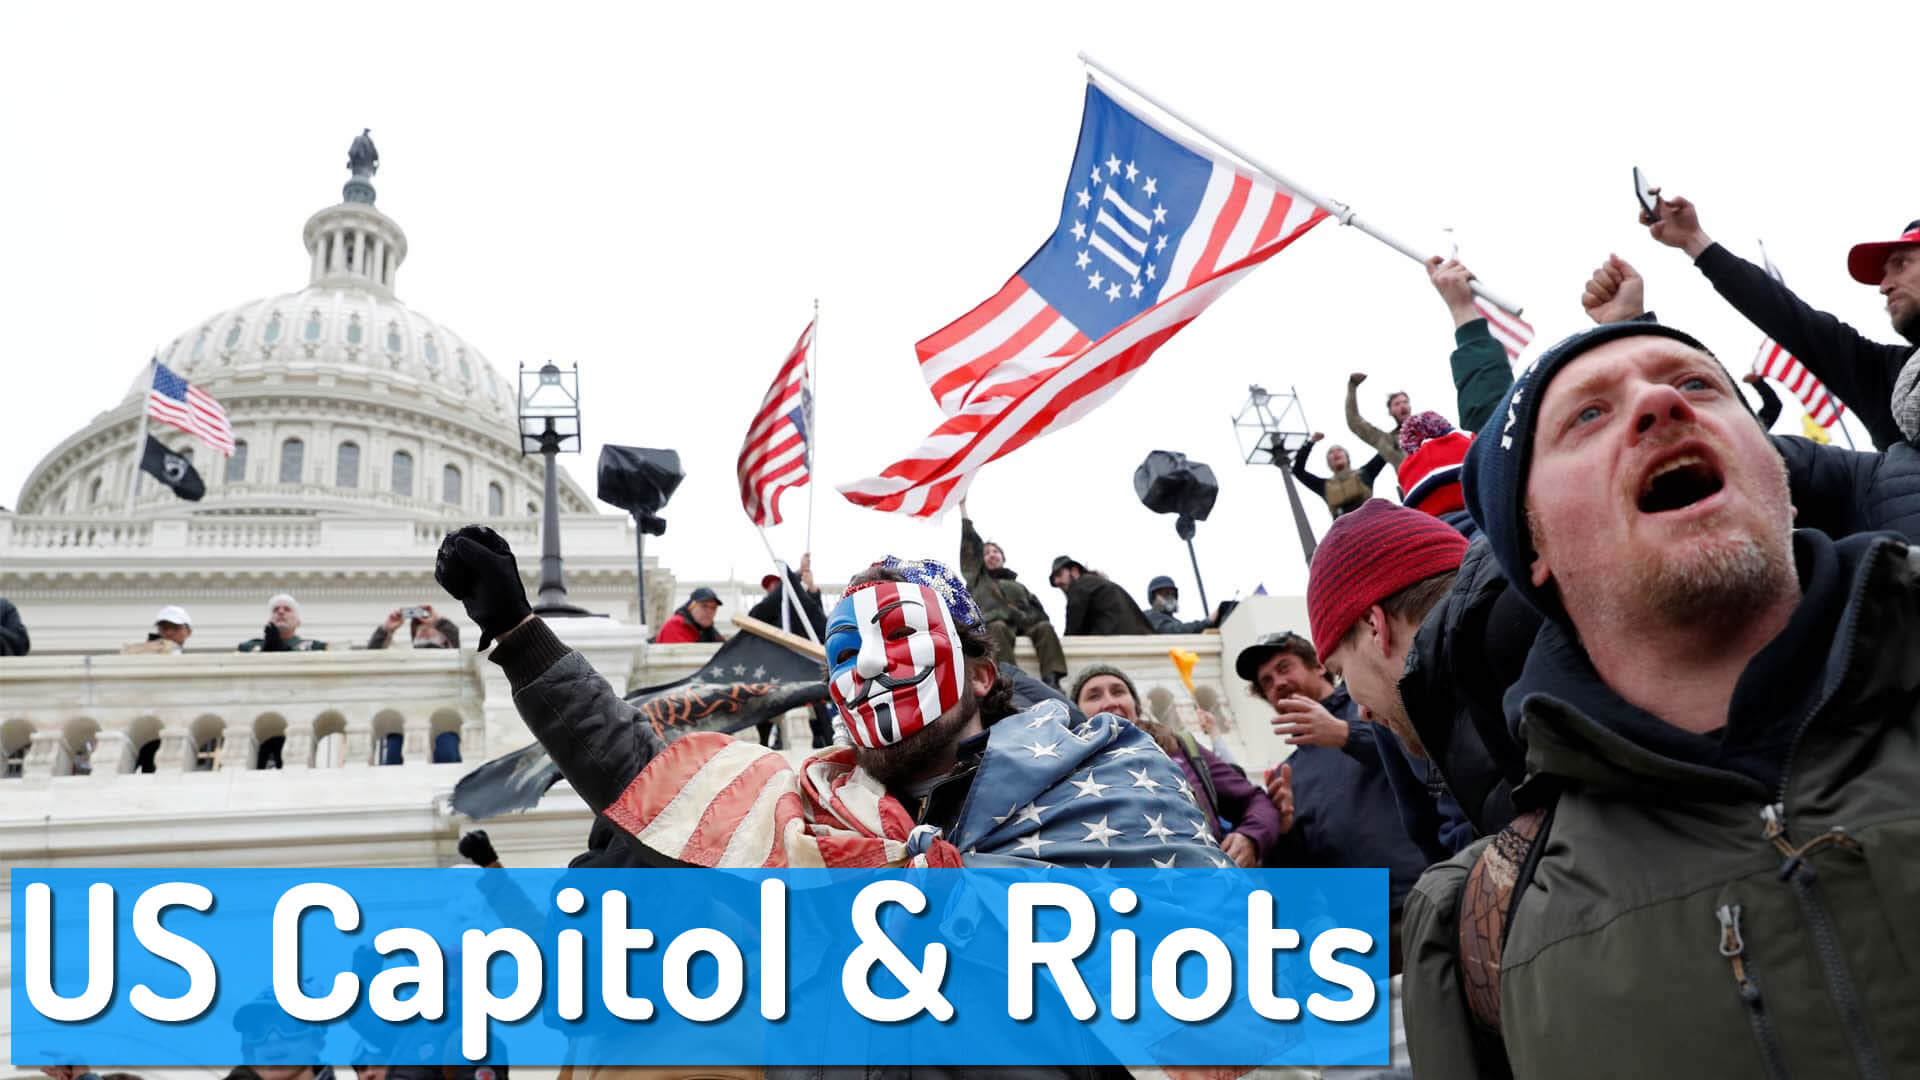 The US Capitol, History, Aerial View and US Capitol Riot